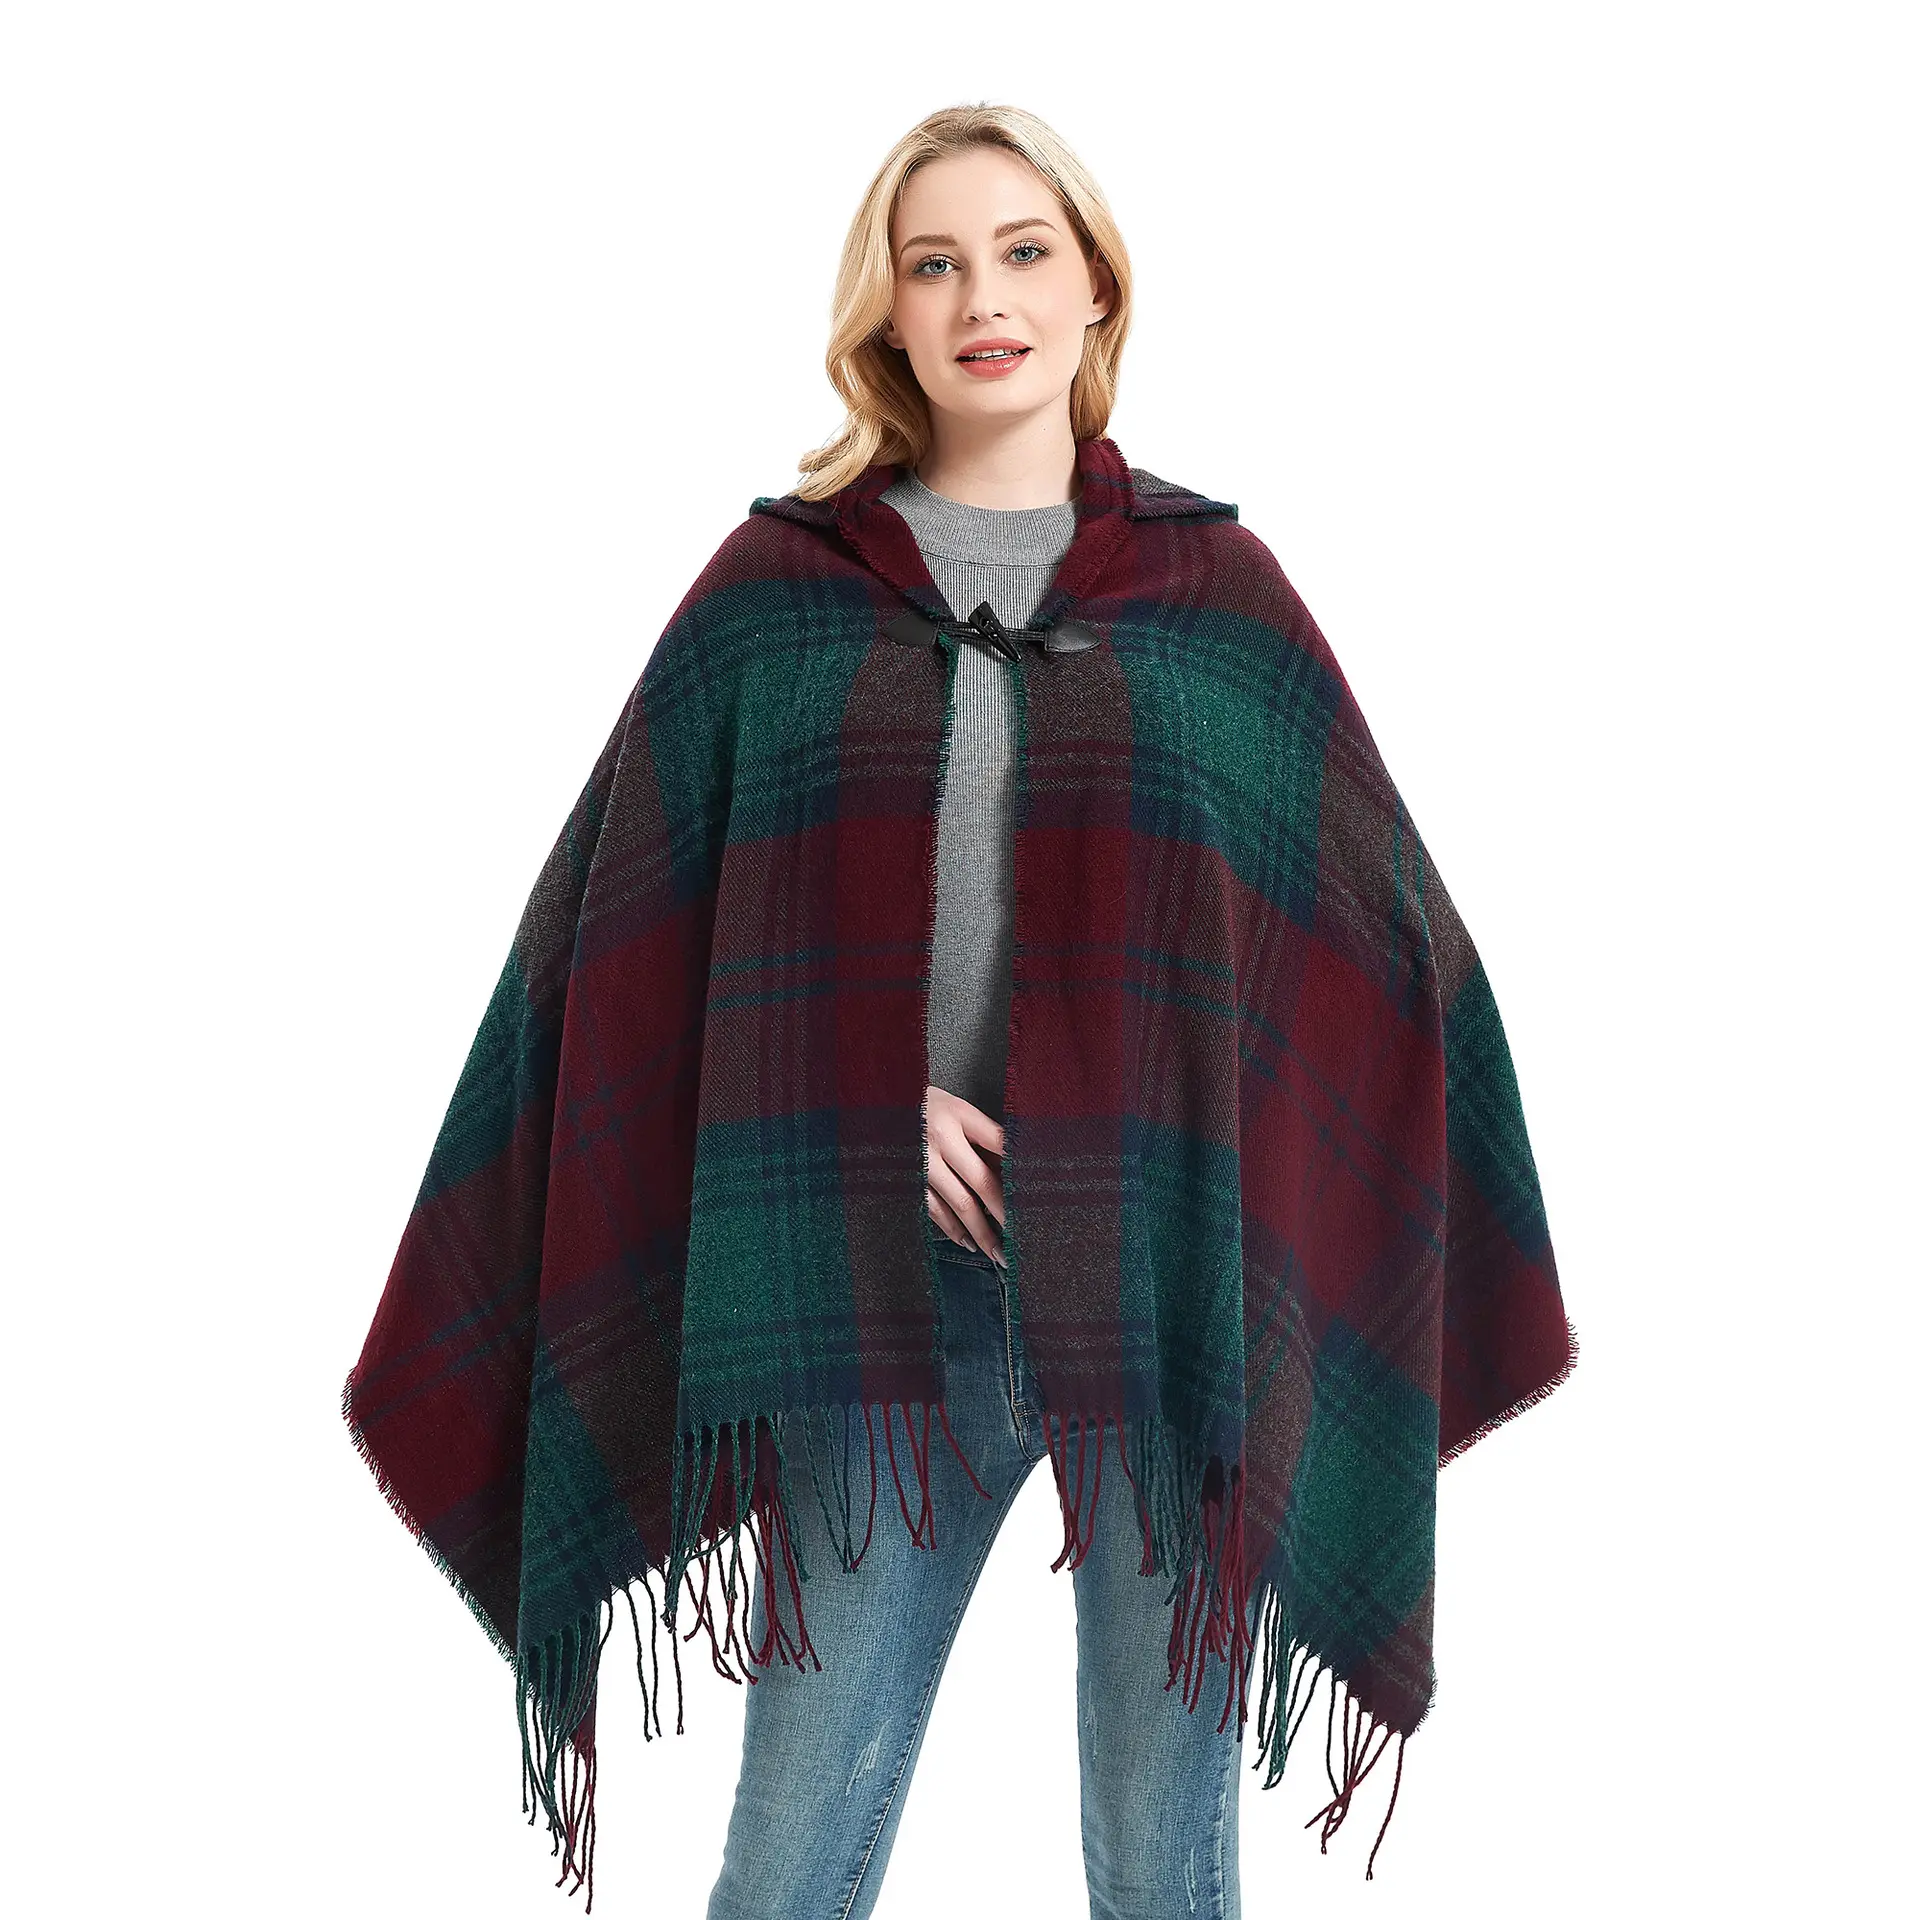 Wholesale Winter Warm Geometric Ponchos Cashmere Scarves Women Shawls And Wraps Pashmina Thick Capes Blanket Scarf